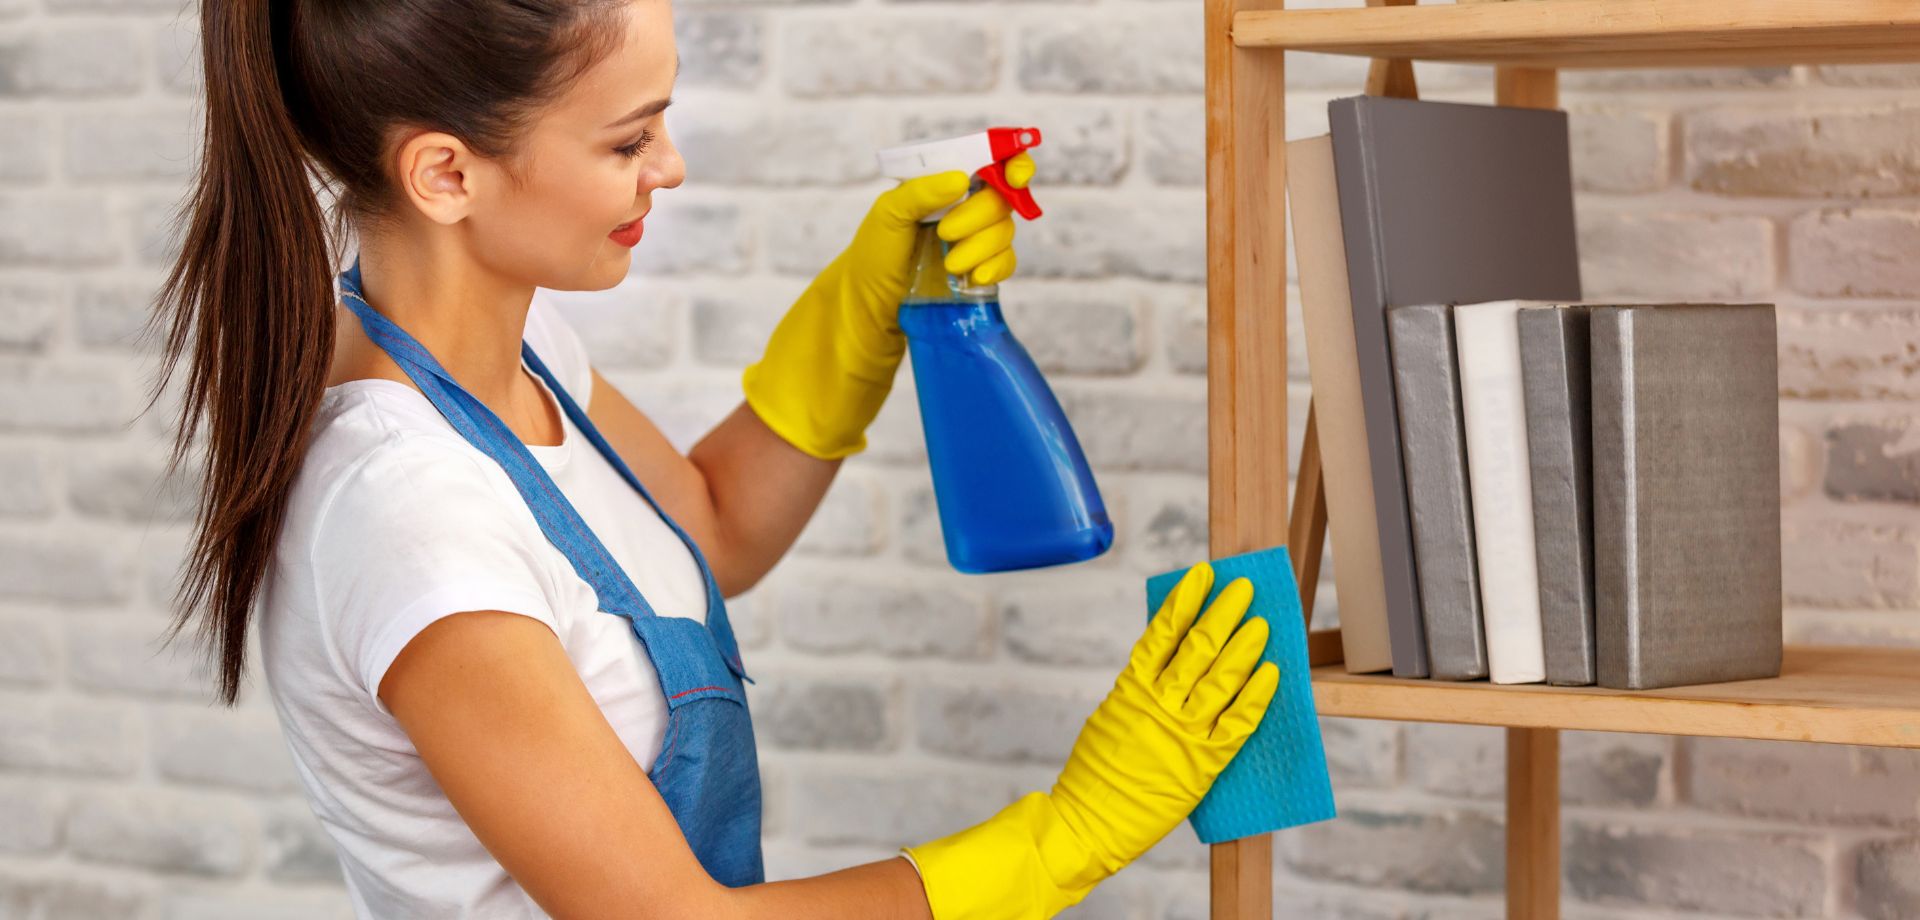 Aged Care Centre Cleaning Services in Melbourne